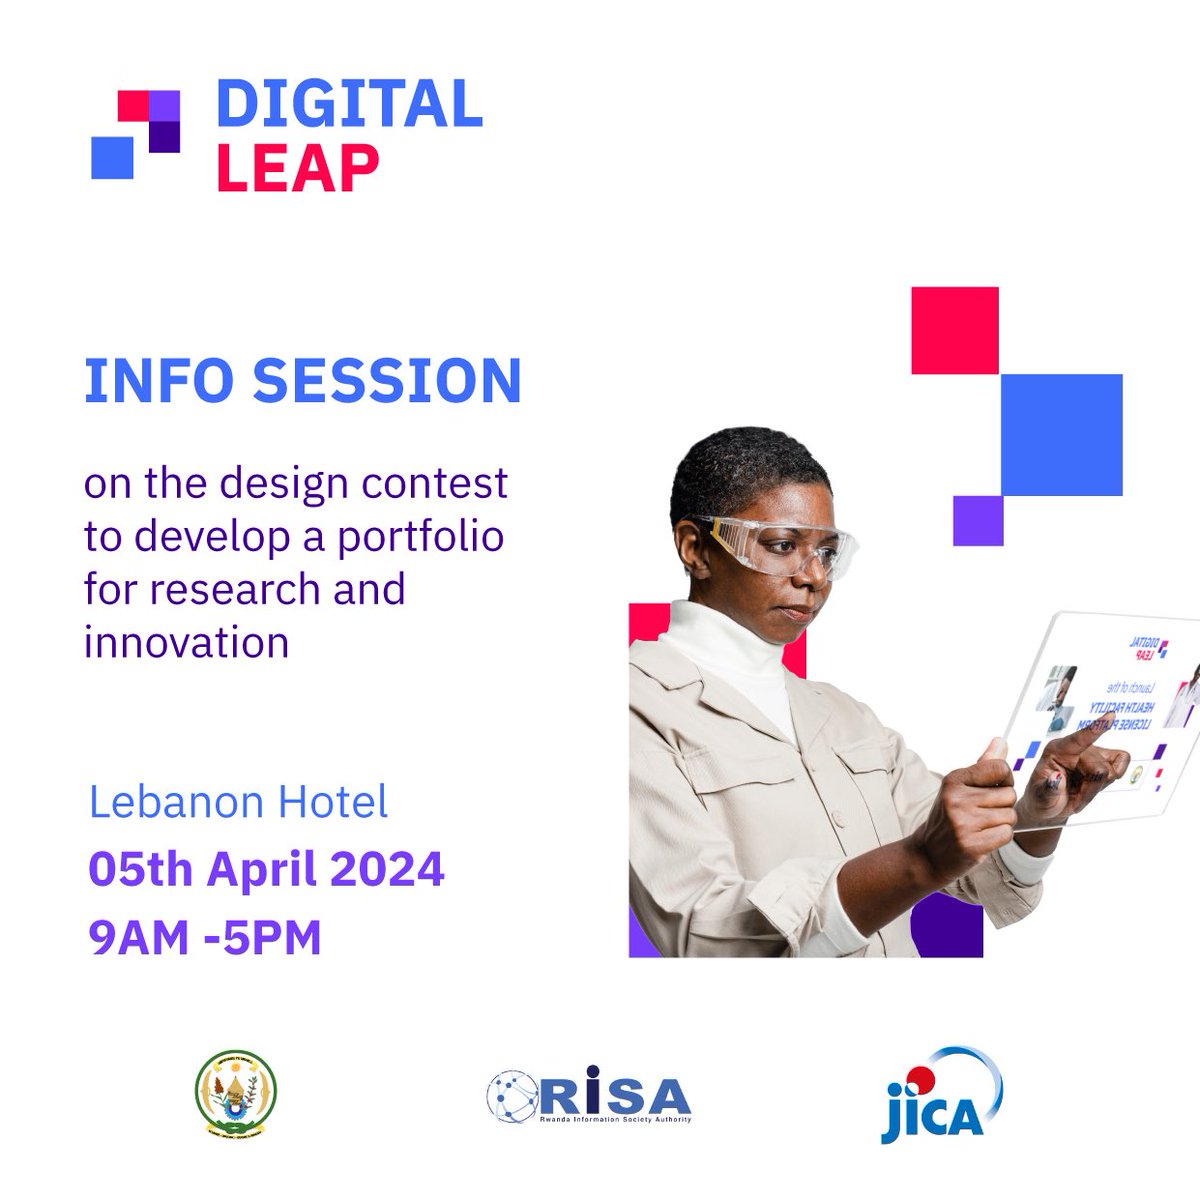 Don't miss our info session at the Lebanon Hotel tomorrow at 9 AM! Discover more about the design contest and the portfolio for research and innovation model. See you there!